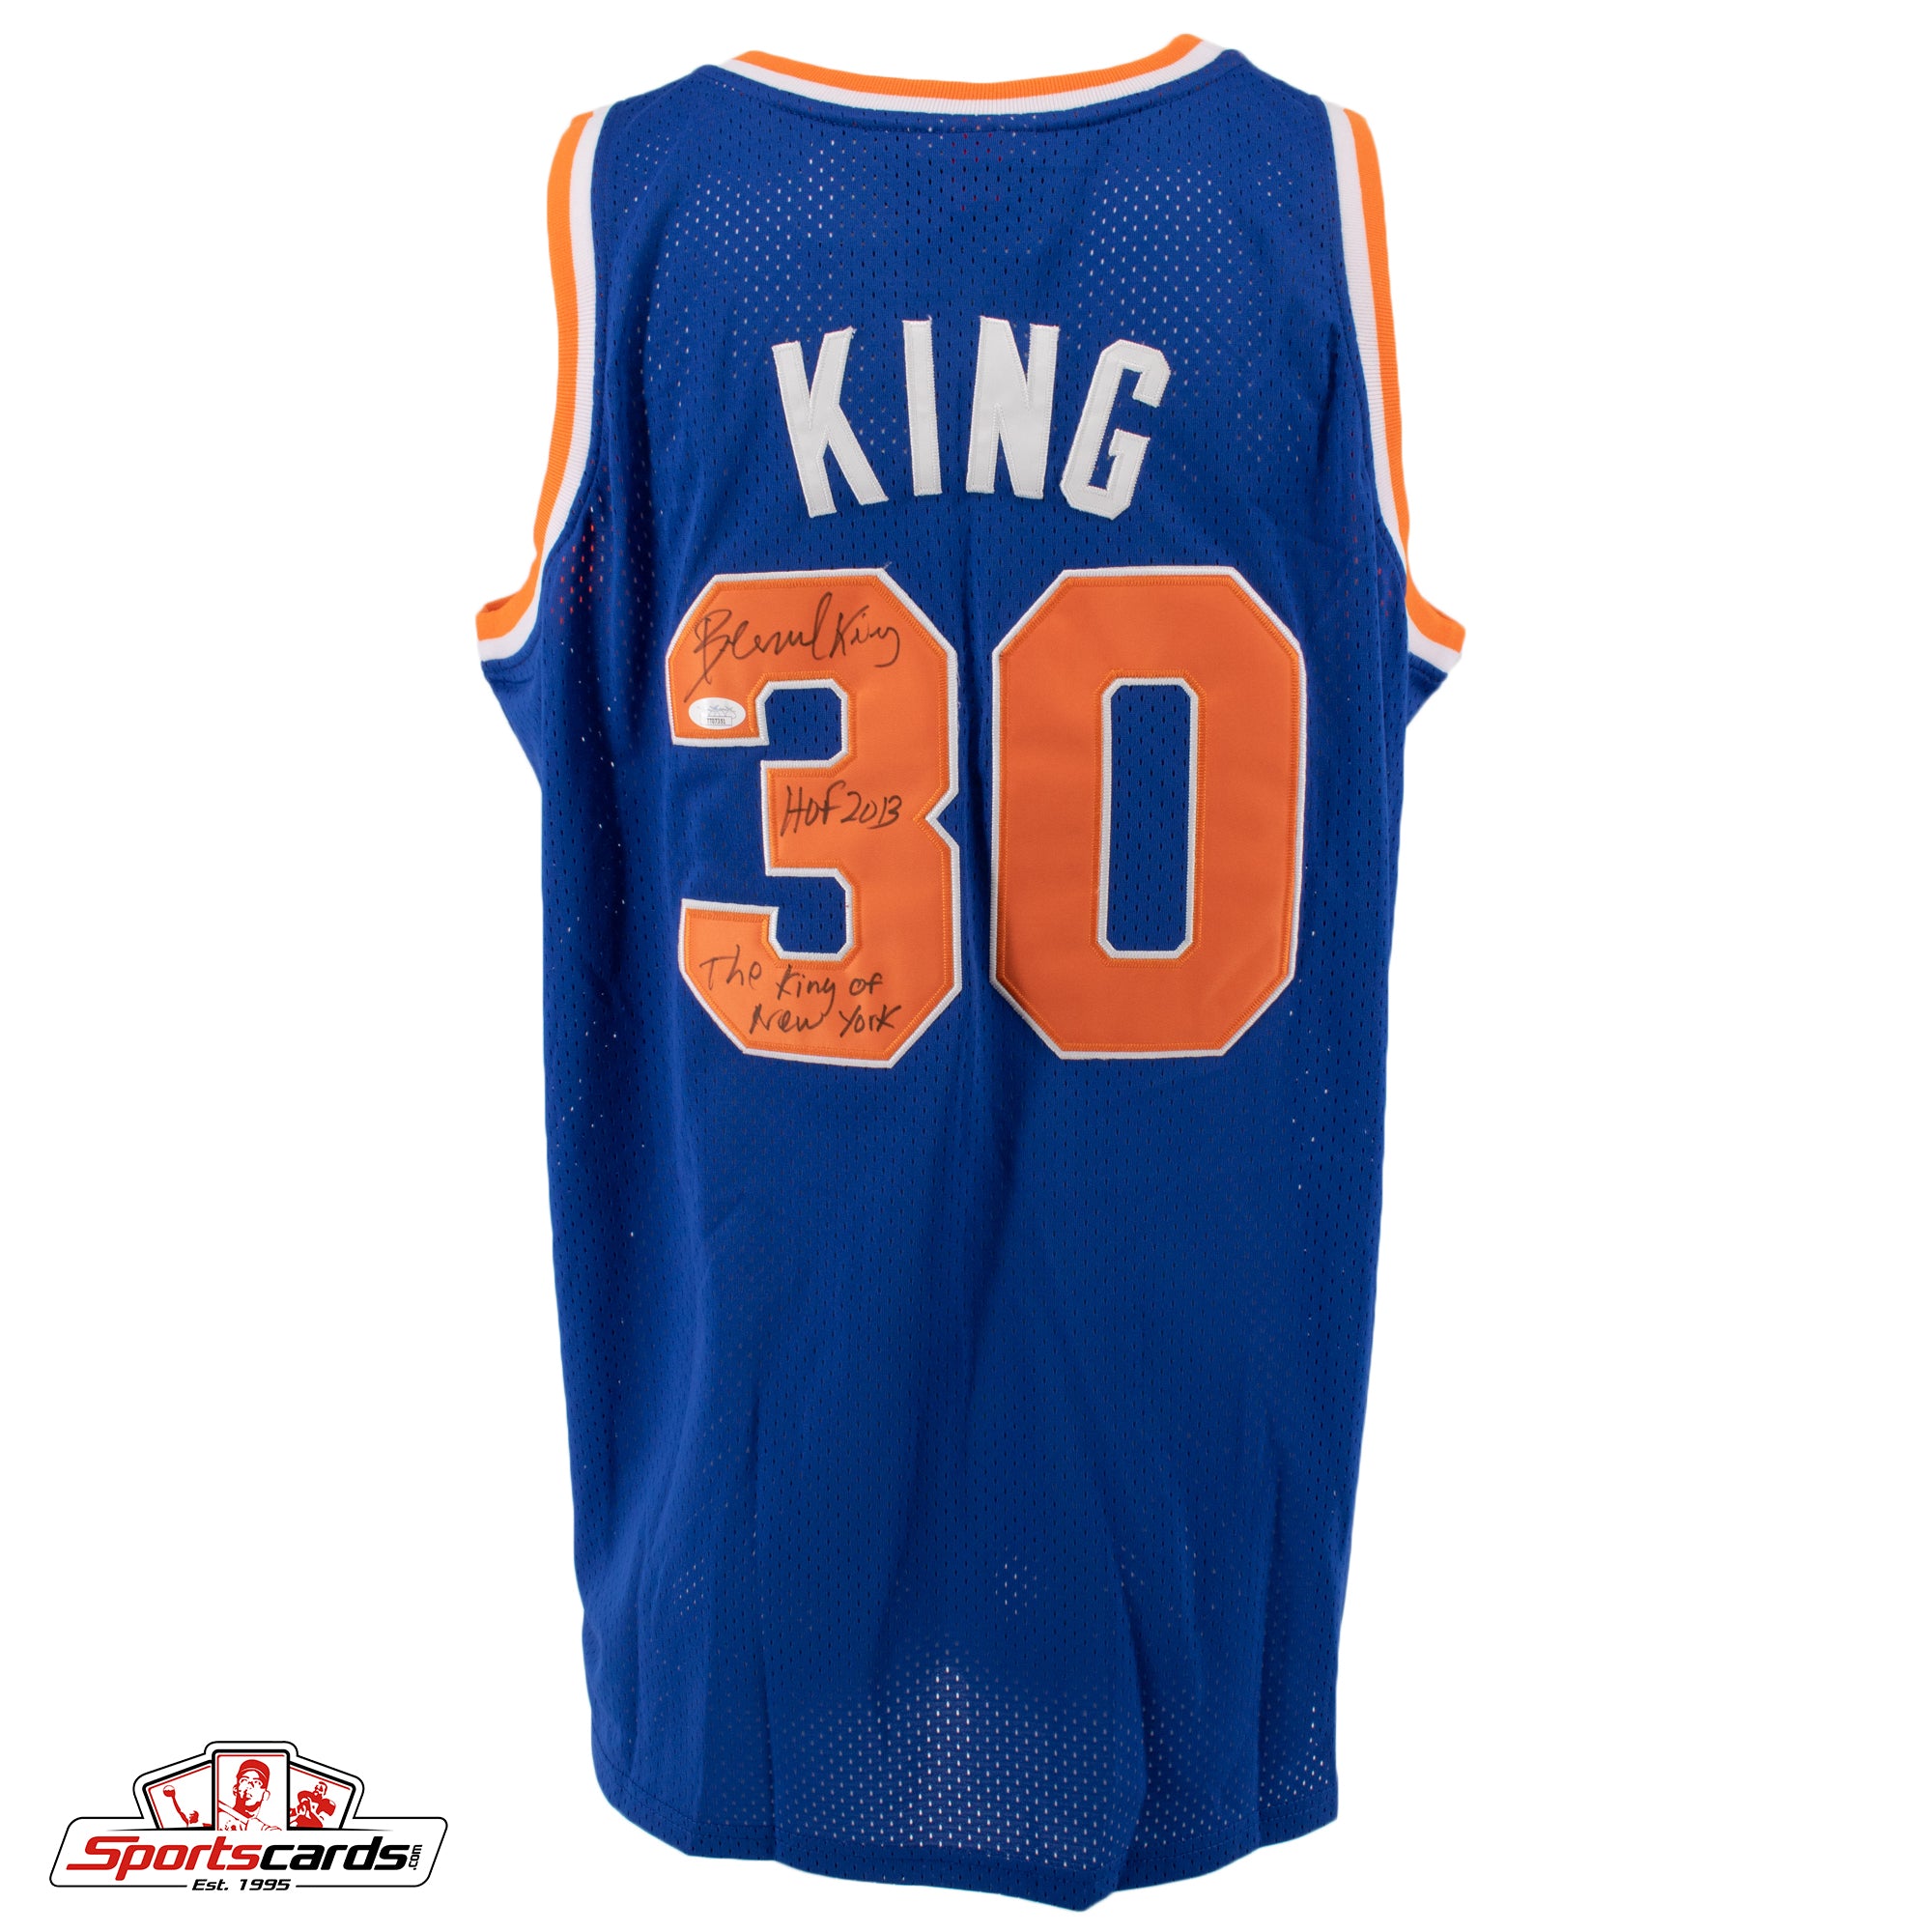 Bernard King It's Good to be King HOF 2013 Signed Autographed NY